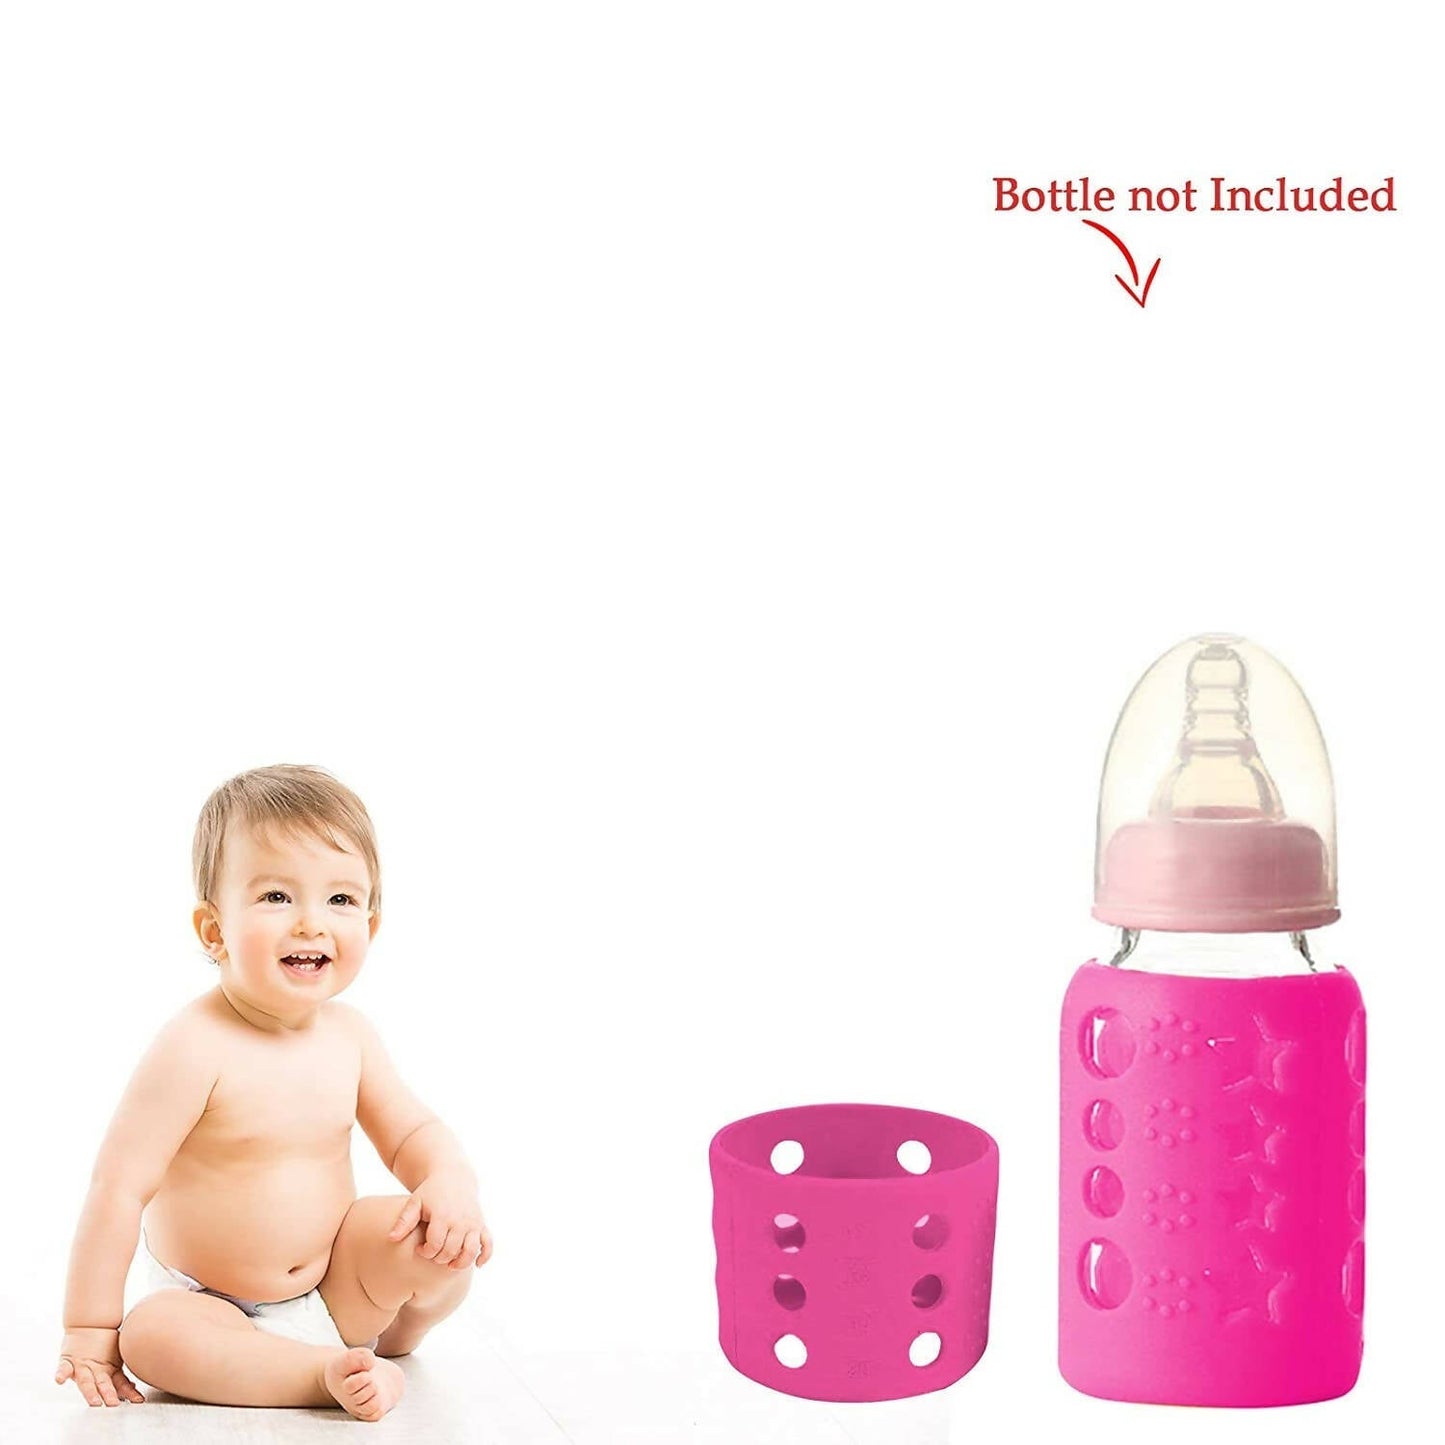 Safe-O-Kid Silicone Baby Feeding Bottle Cover Cum Sleeve for Insulated Protection 60mL- Pink